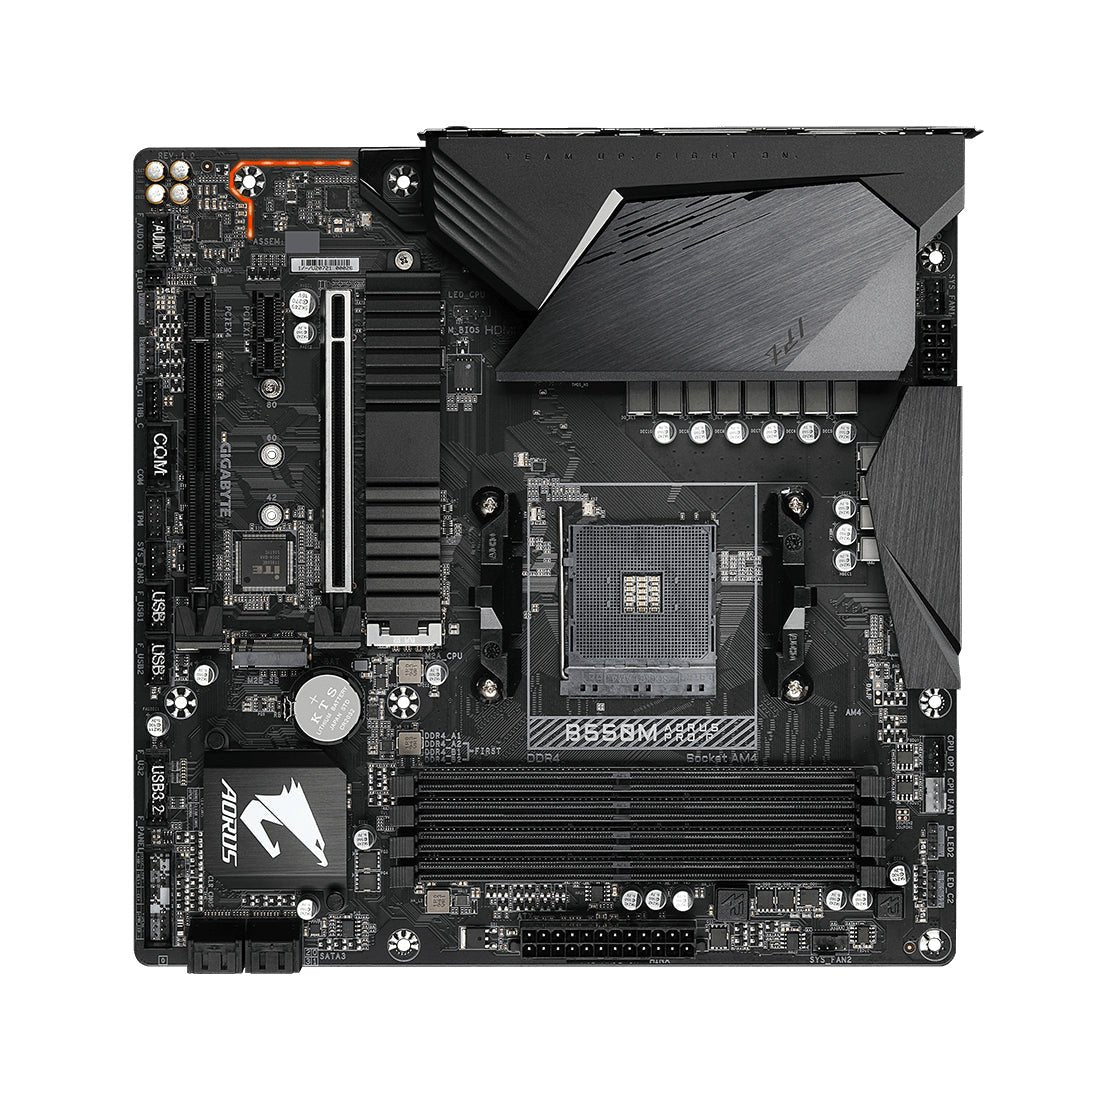 (Pre-Owned) Gigabyte B550M Aorus PRO-P DDR4 AM4 mATX Gaming AMD Motherboard - Store 974 | ستور ٩٧٤